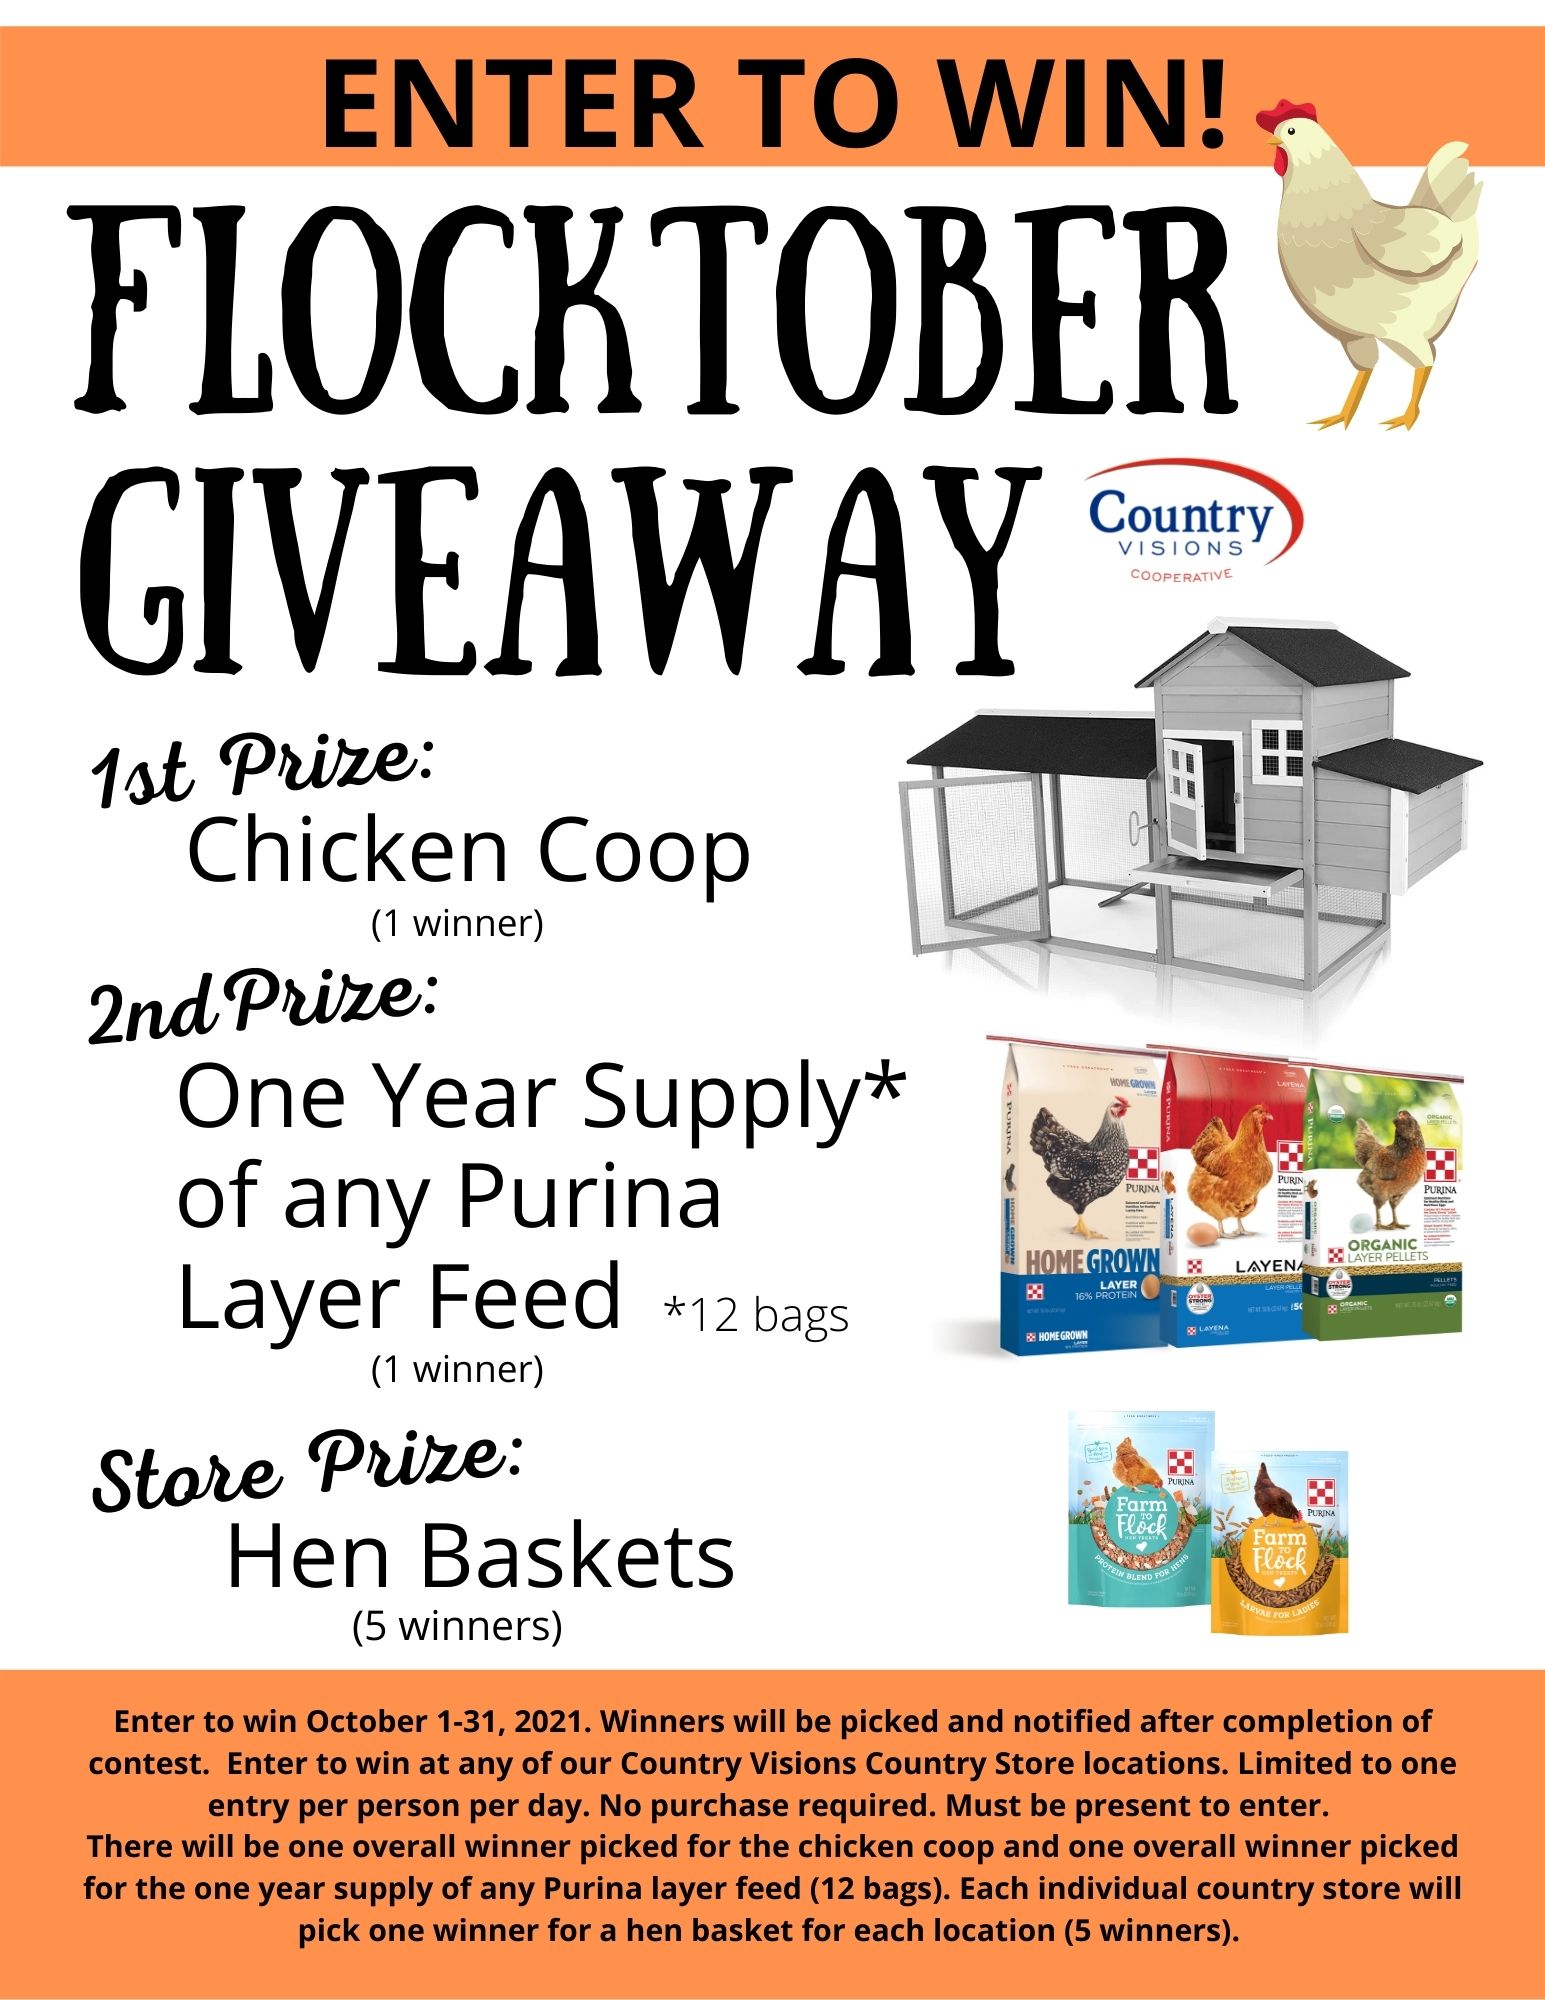 October is Flock-tober at Country Visions